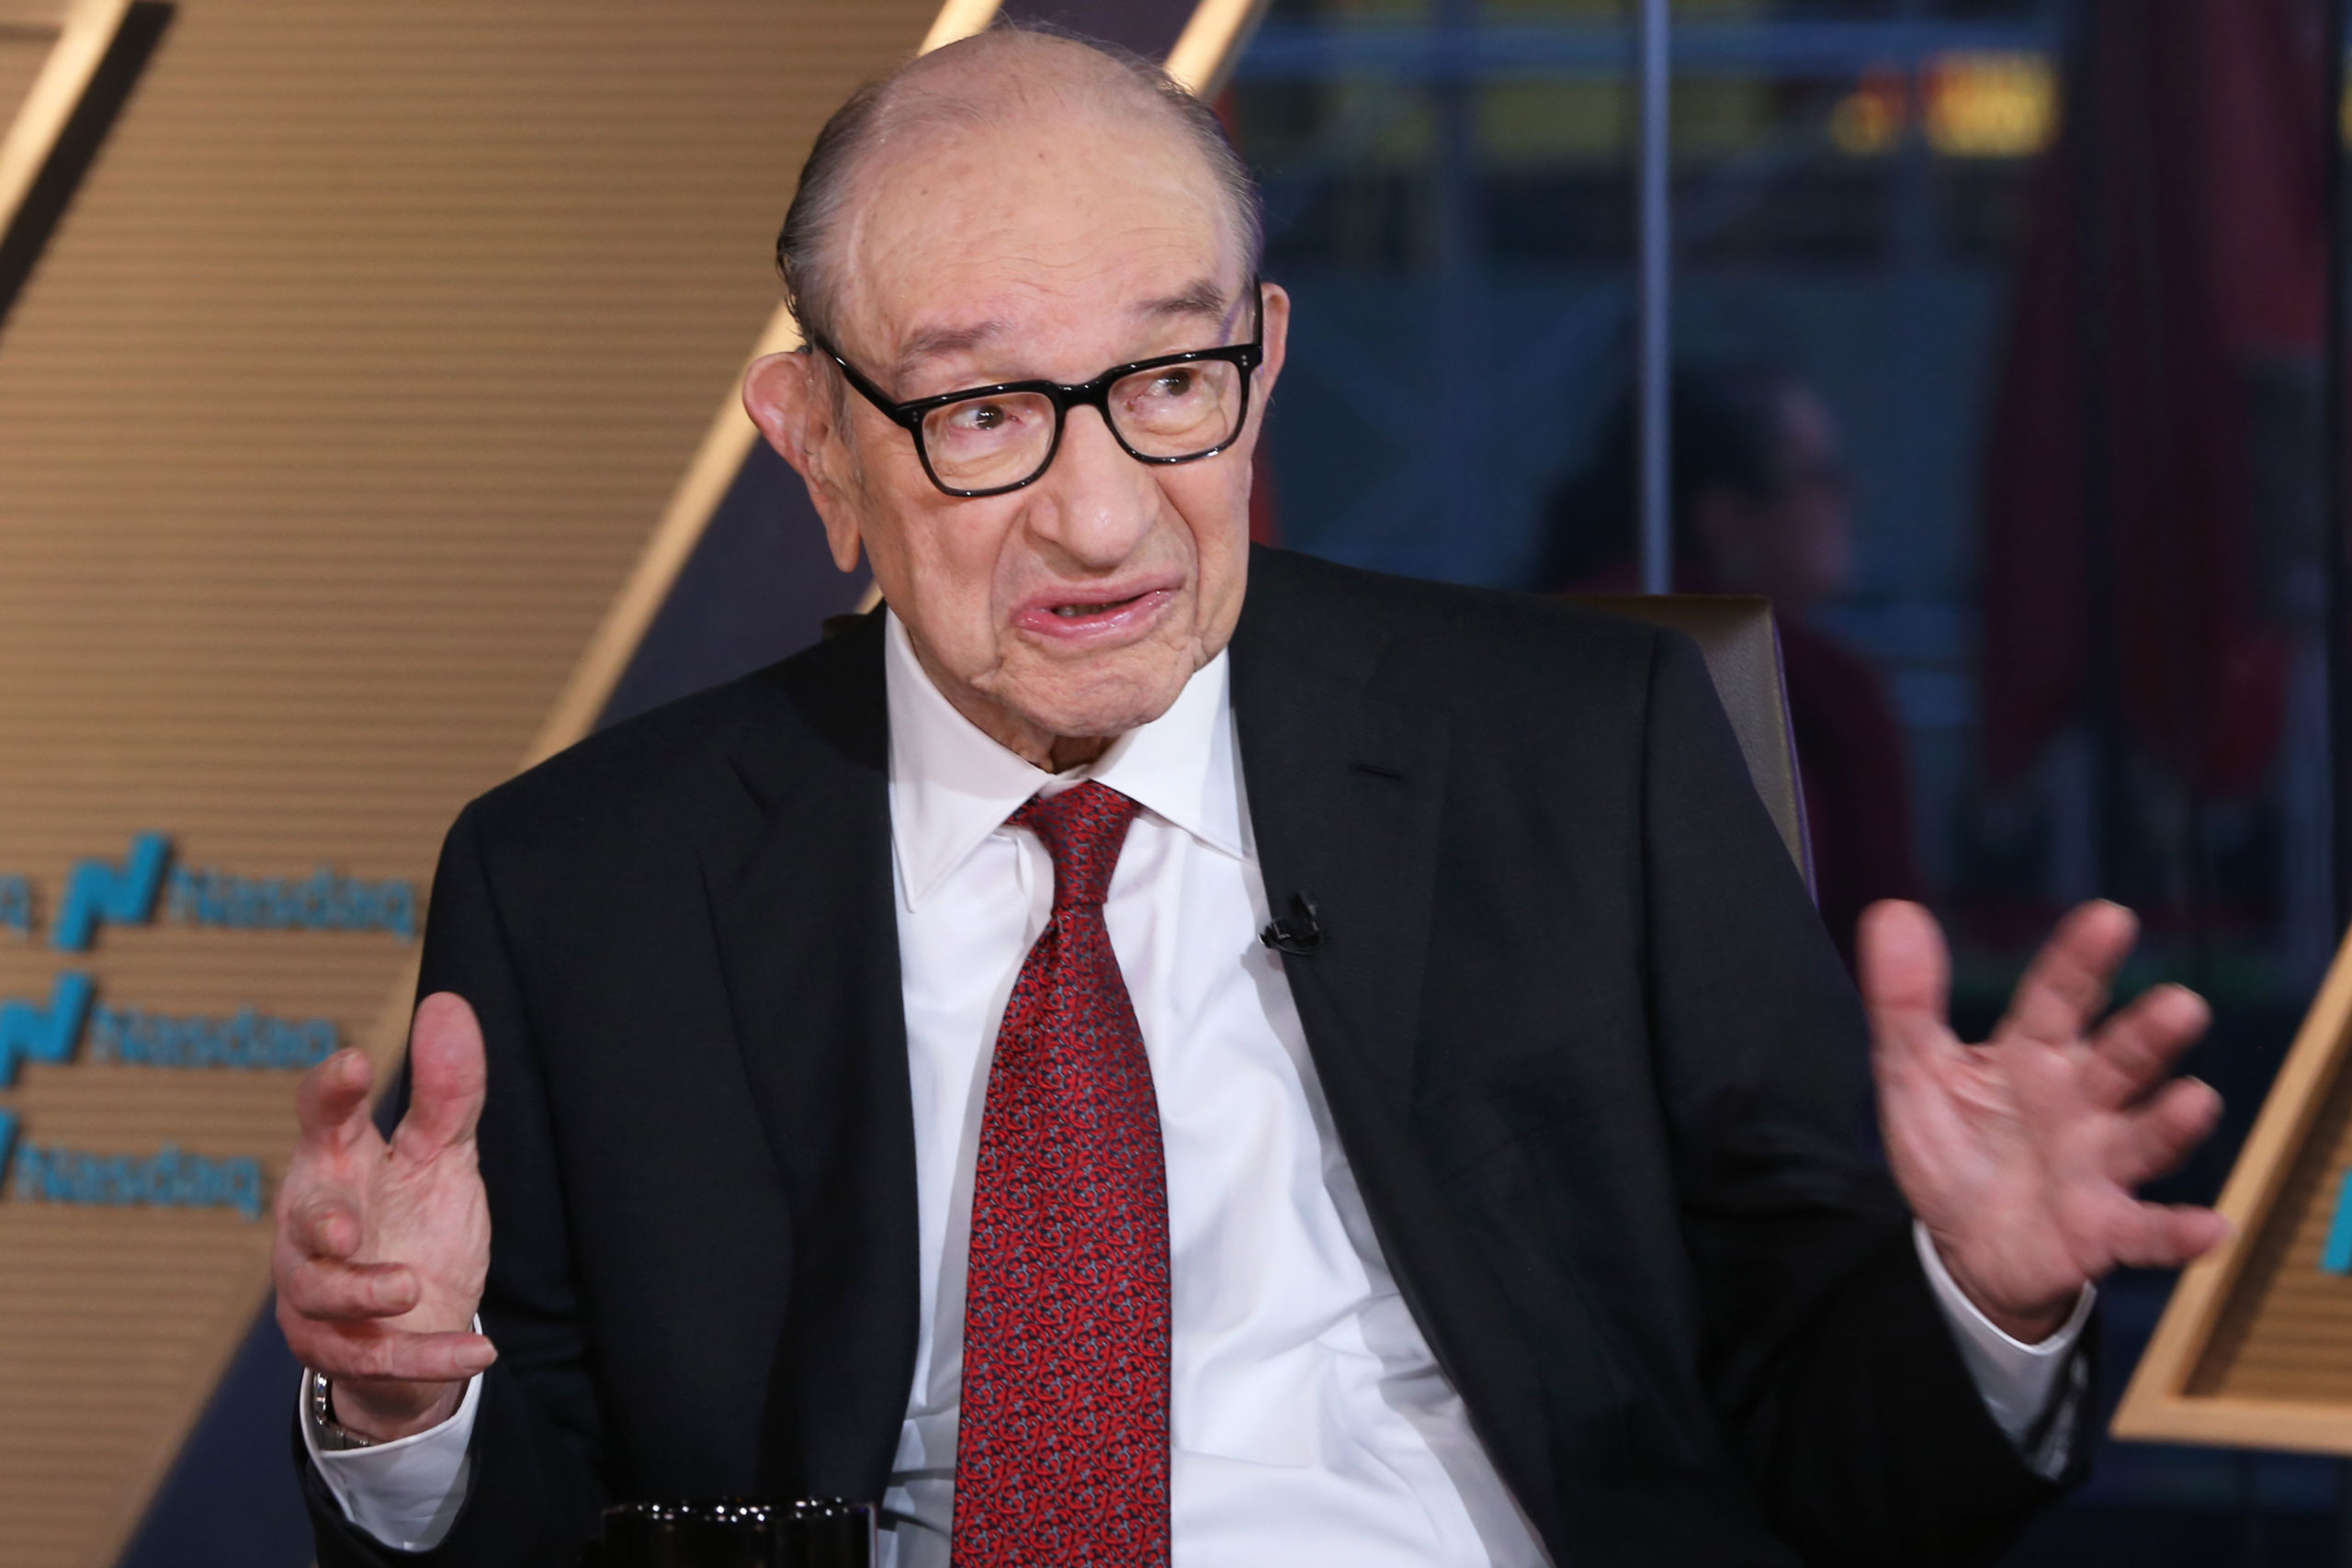 Alan Greenspan lists inflation and the budget deficit as his biggest concerns- oil and gas 360